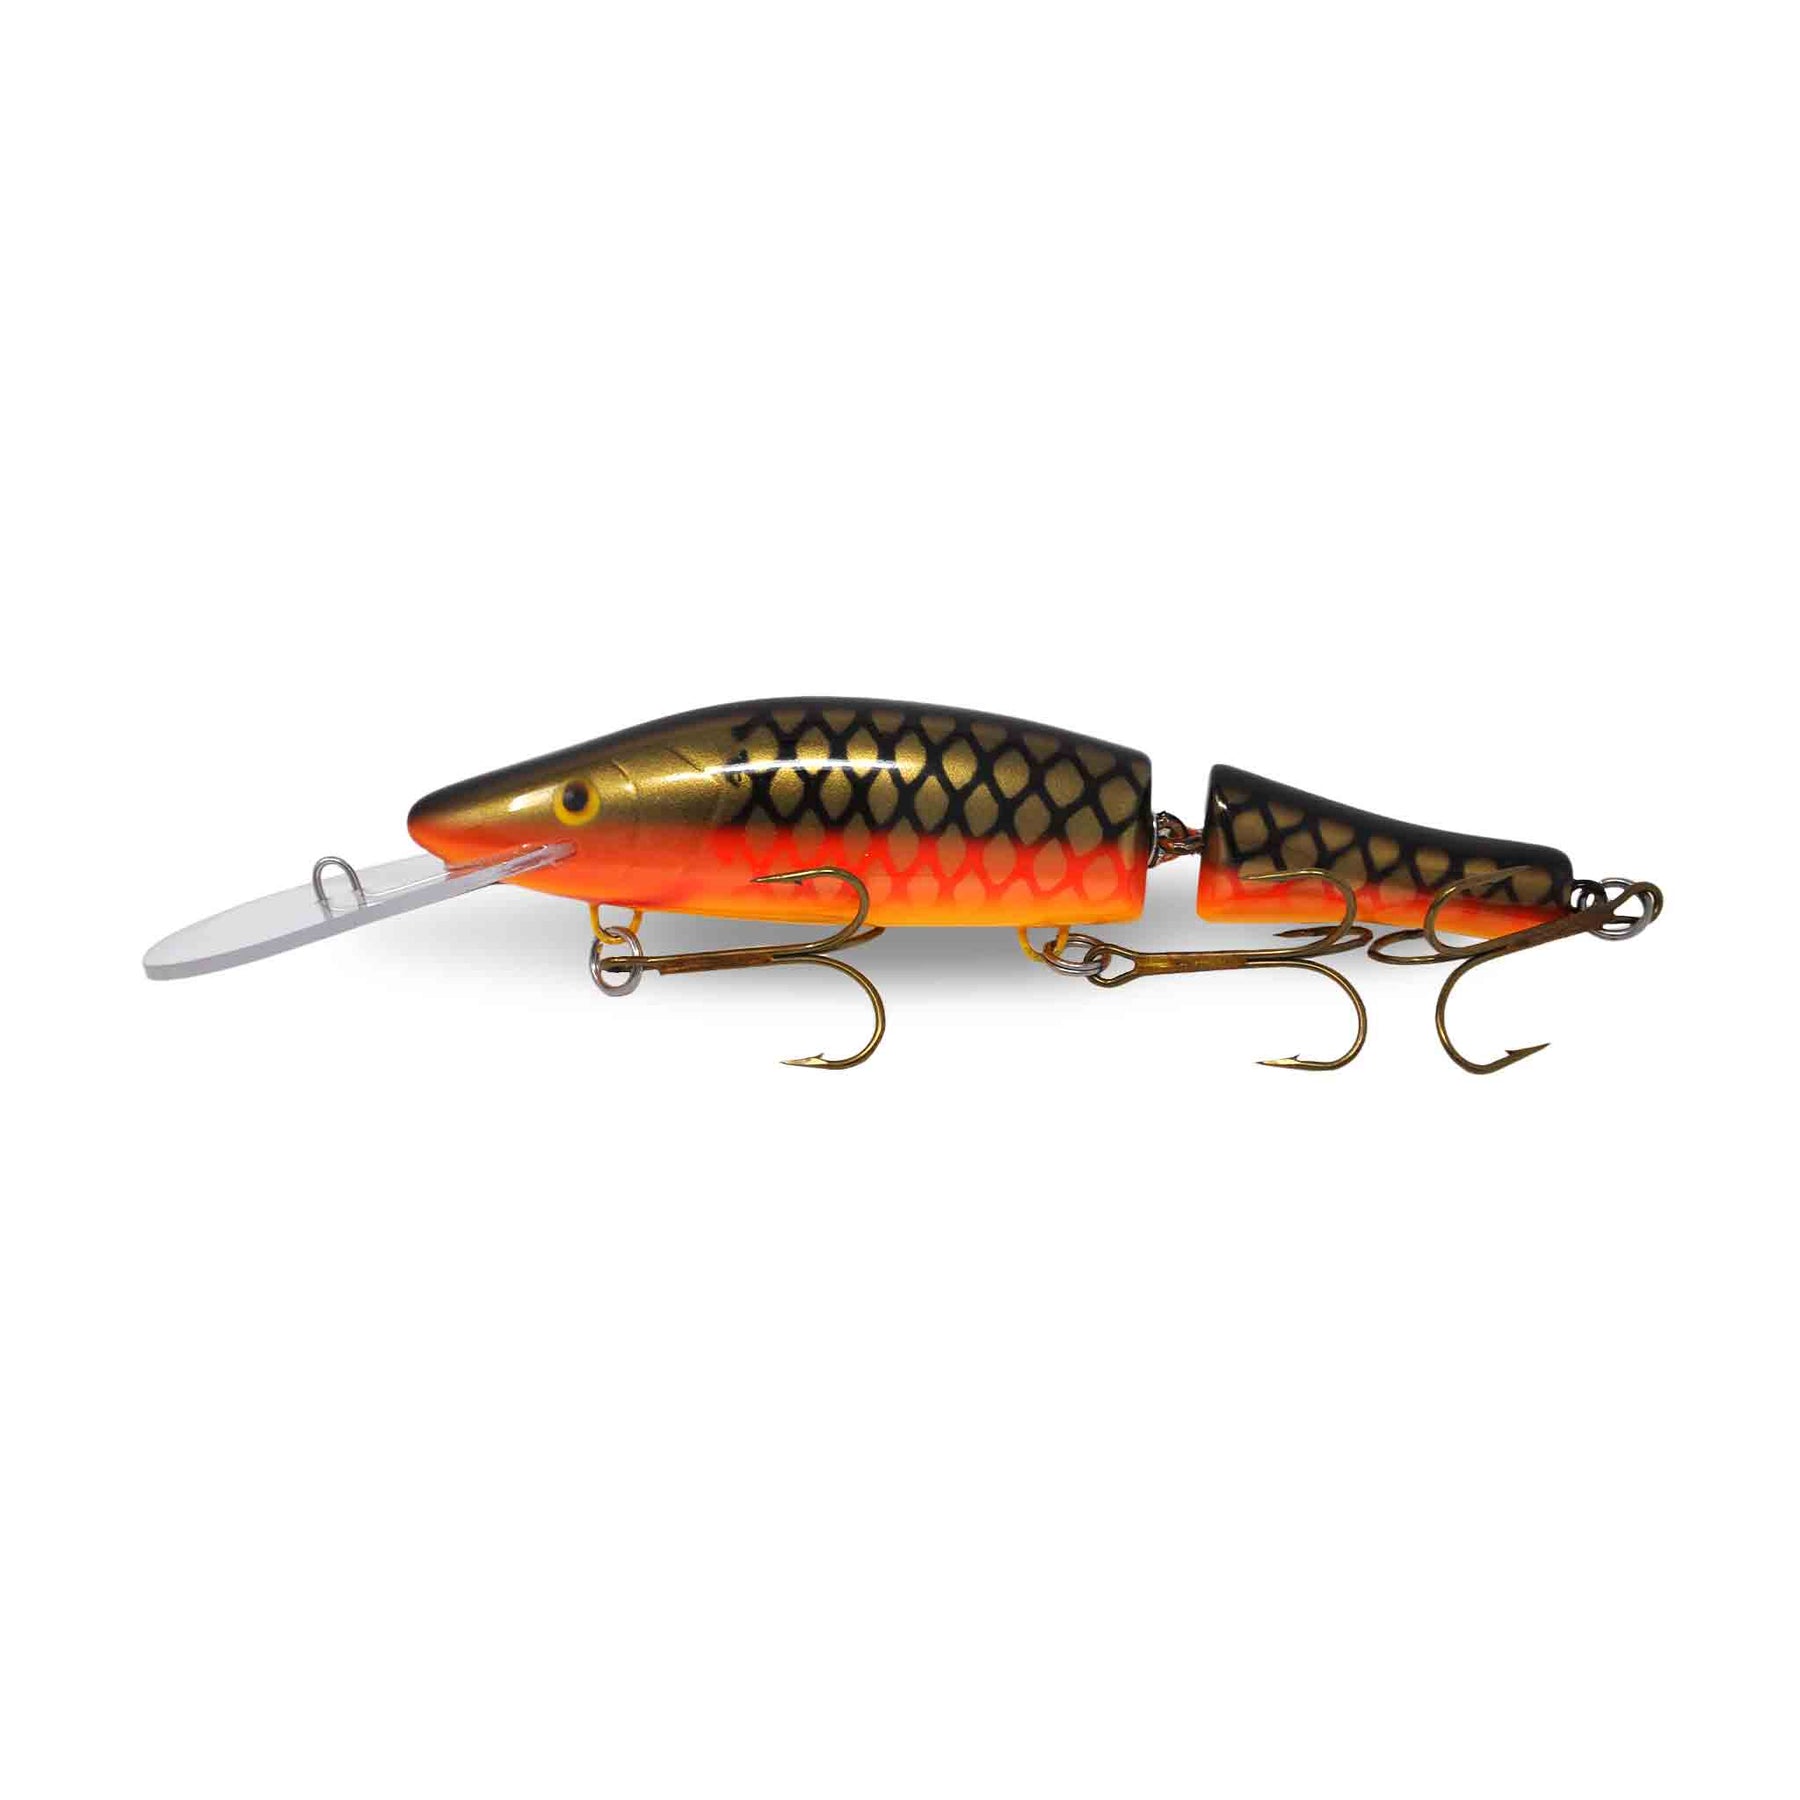 View of Crankbaits Legend lures Jointed Perch Bait Crankbait Carp available at EZOKO Pike and Musky Shop